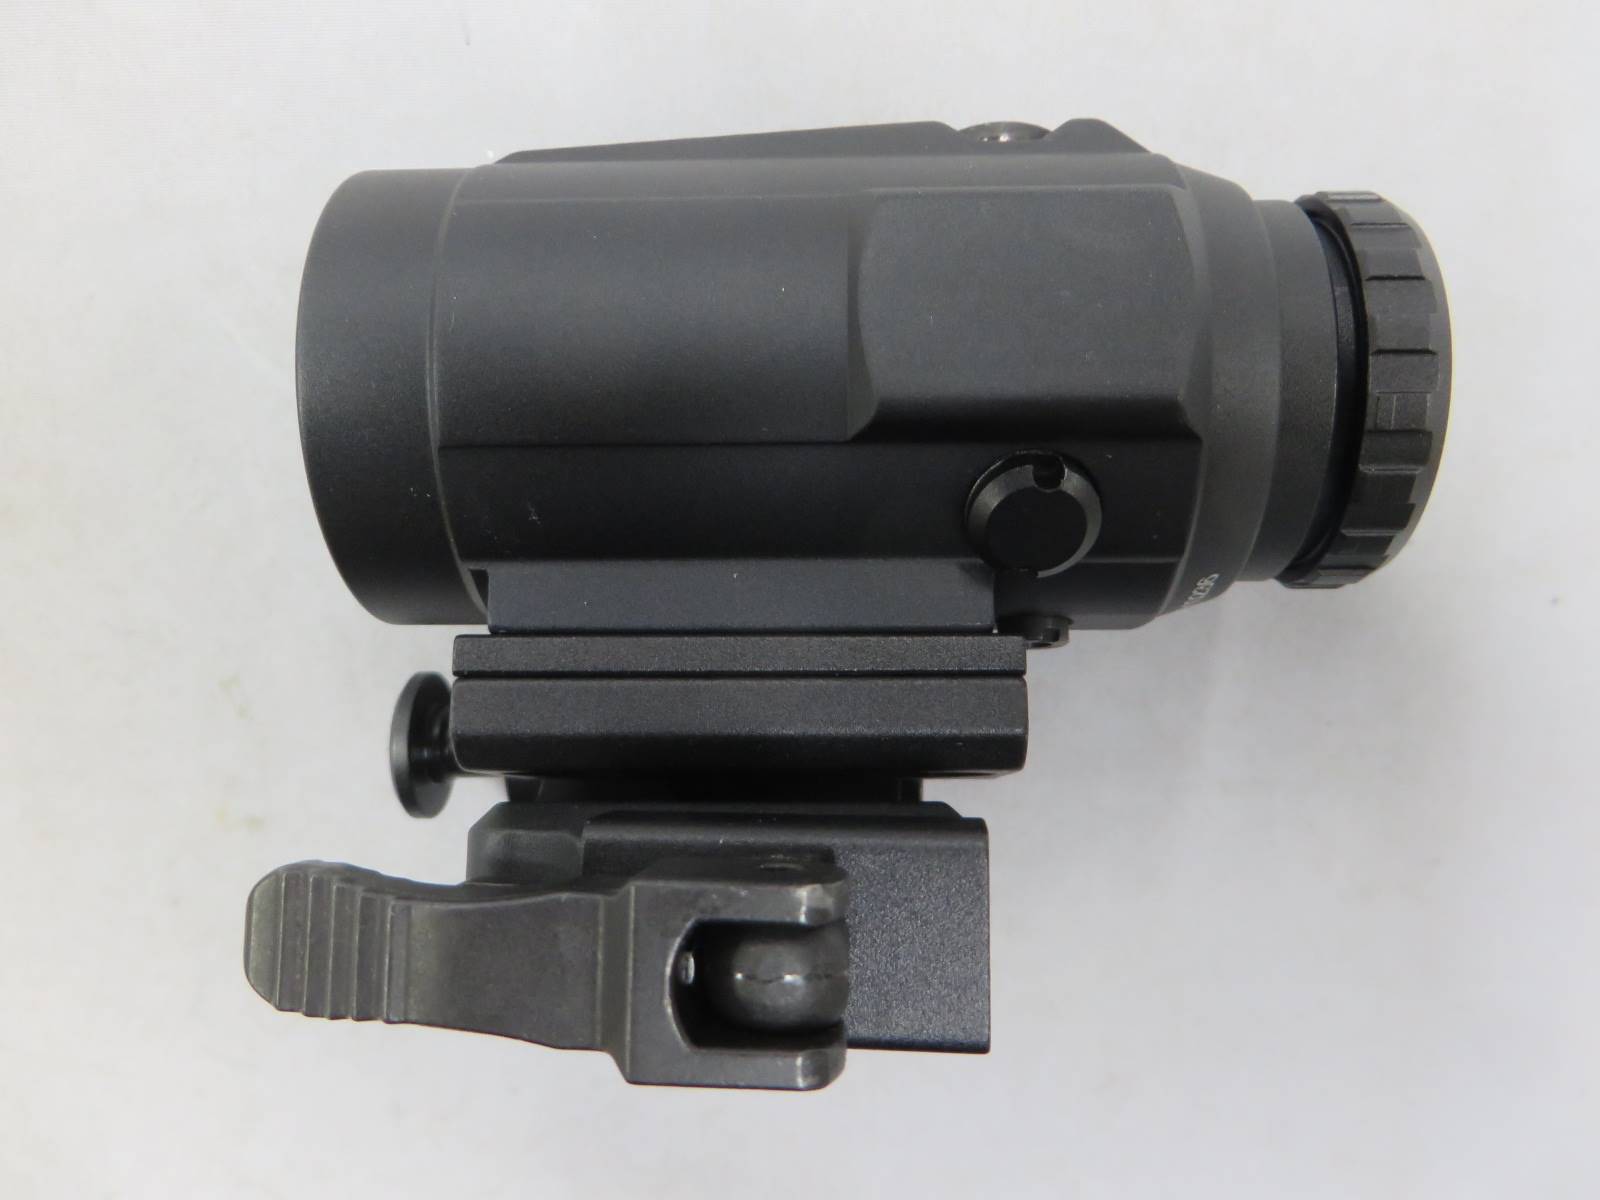 【NOVEL ARMS】MAICO 3X TACTICAL MAGNIFIER マグニファイア